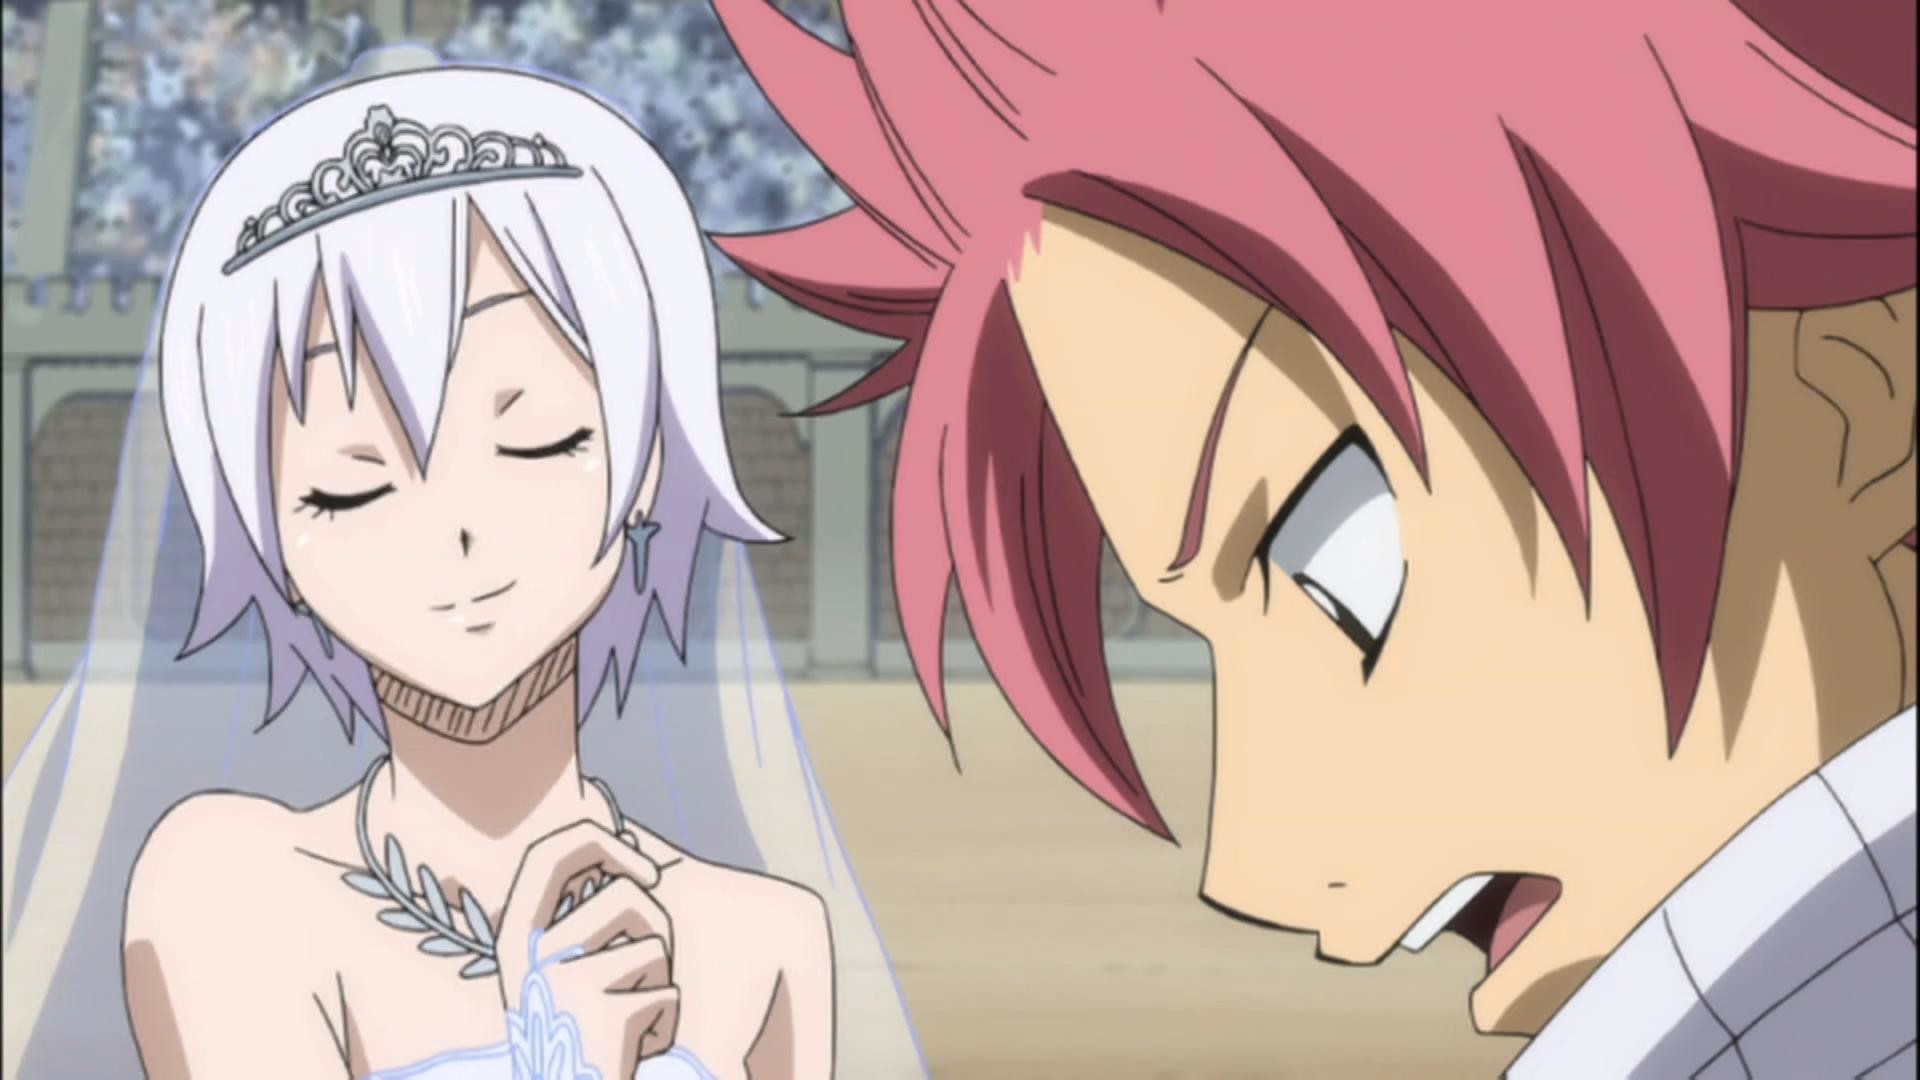 1920x1080 ... Fairy Tail 27 1080p Lisanna and Natsu Dragneel by .